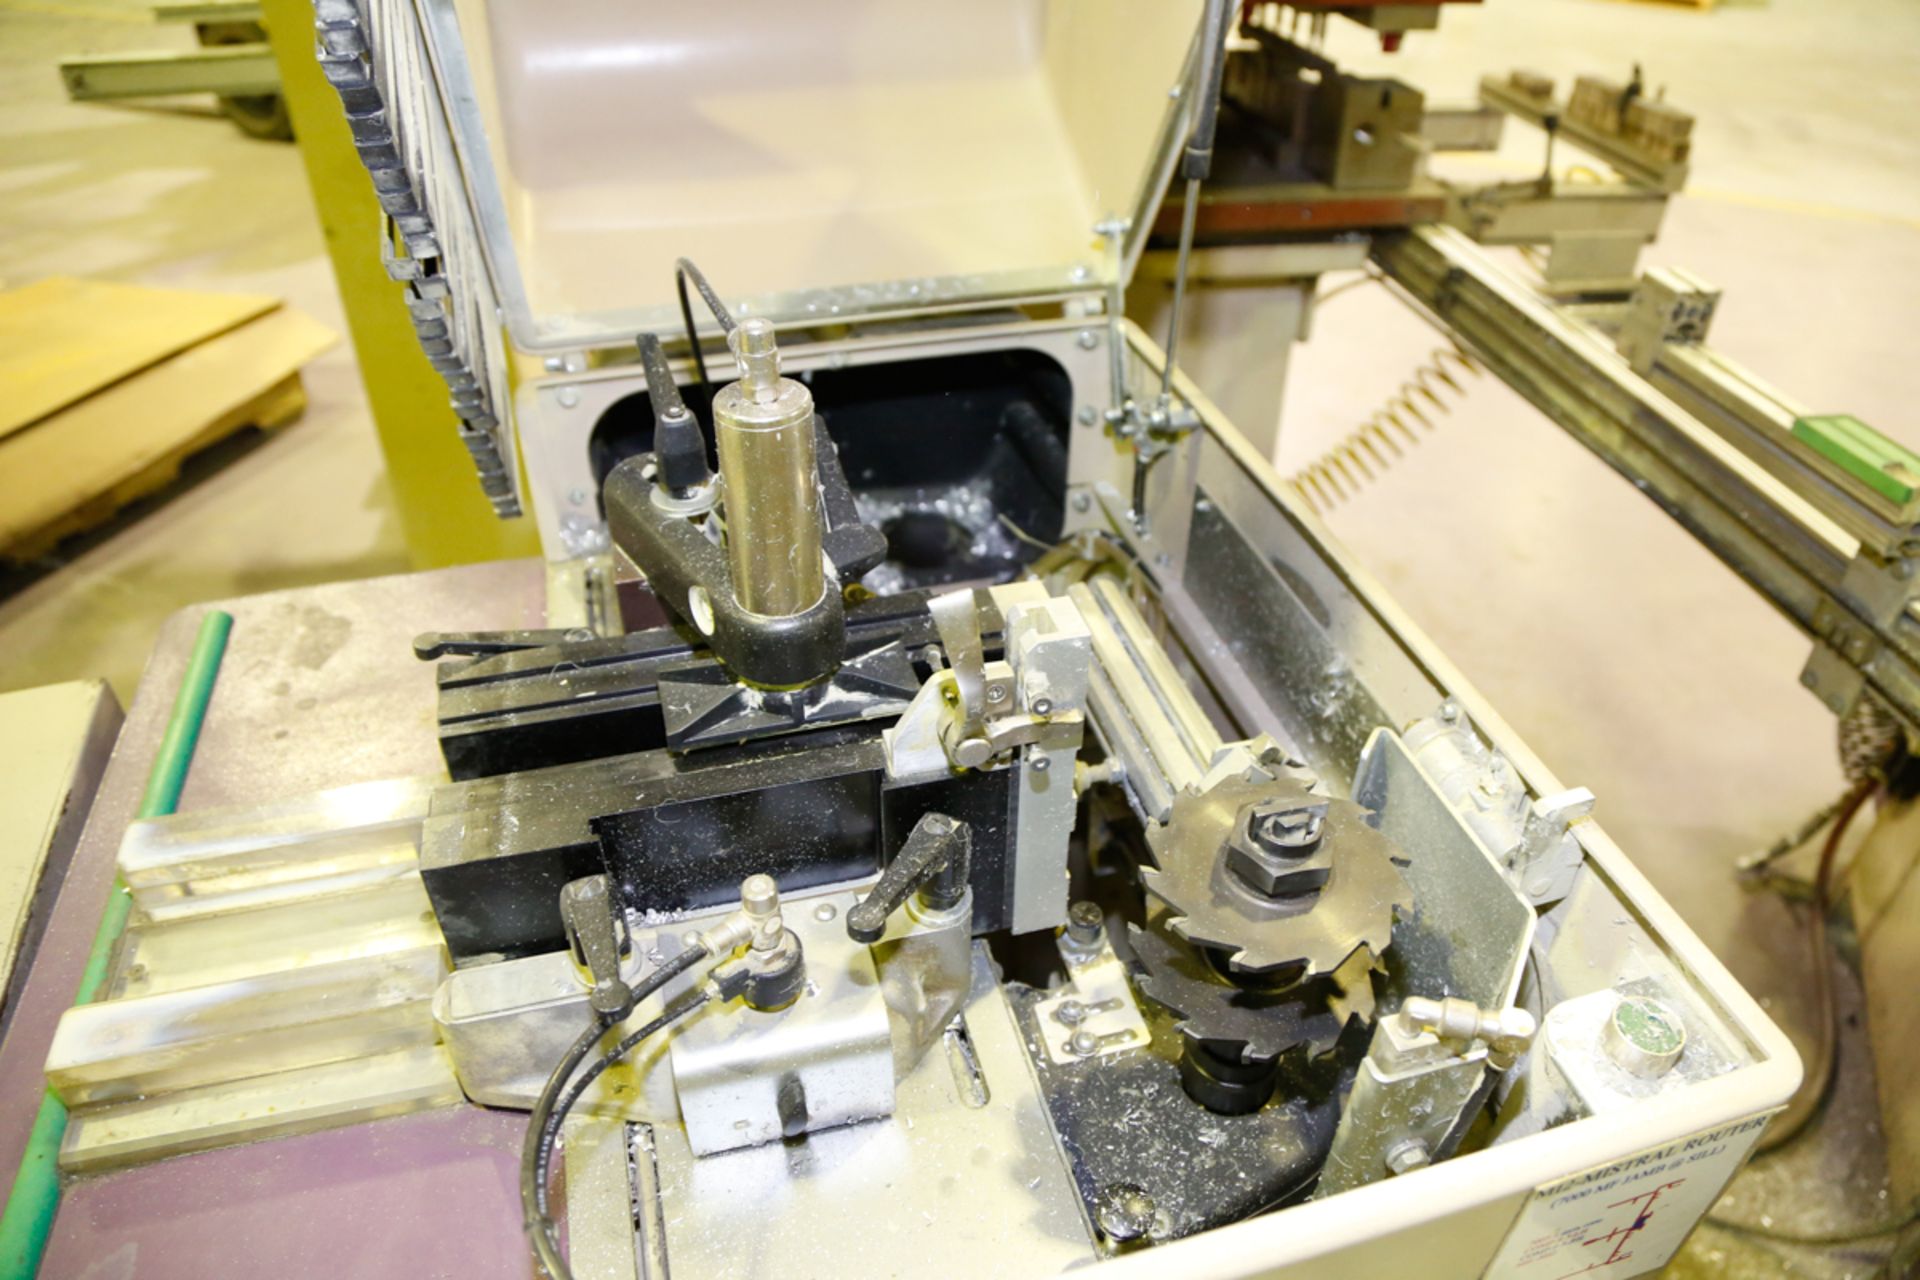 FOM VARIABLE ANGLE END-MILLING MACHINE MOD. MISTRAL 26A, AUTO. CLAMPING & FEED (2001), S/N: 027358 - Image 2 of 3